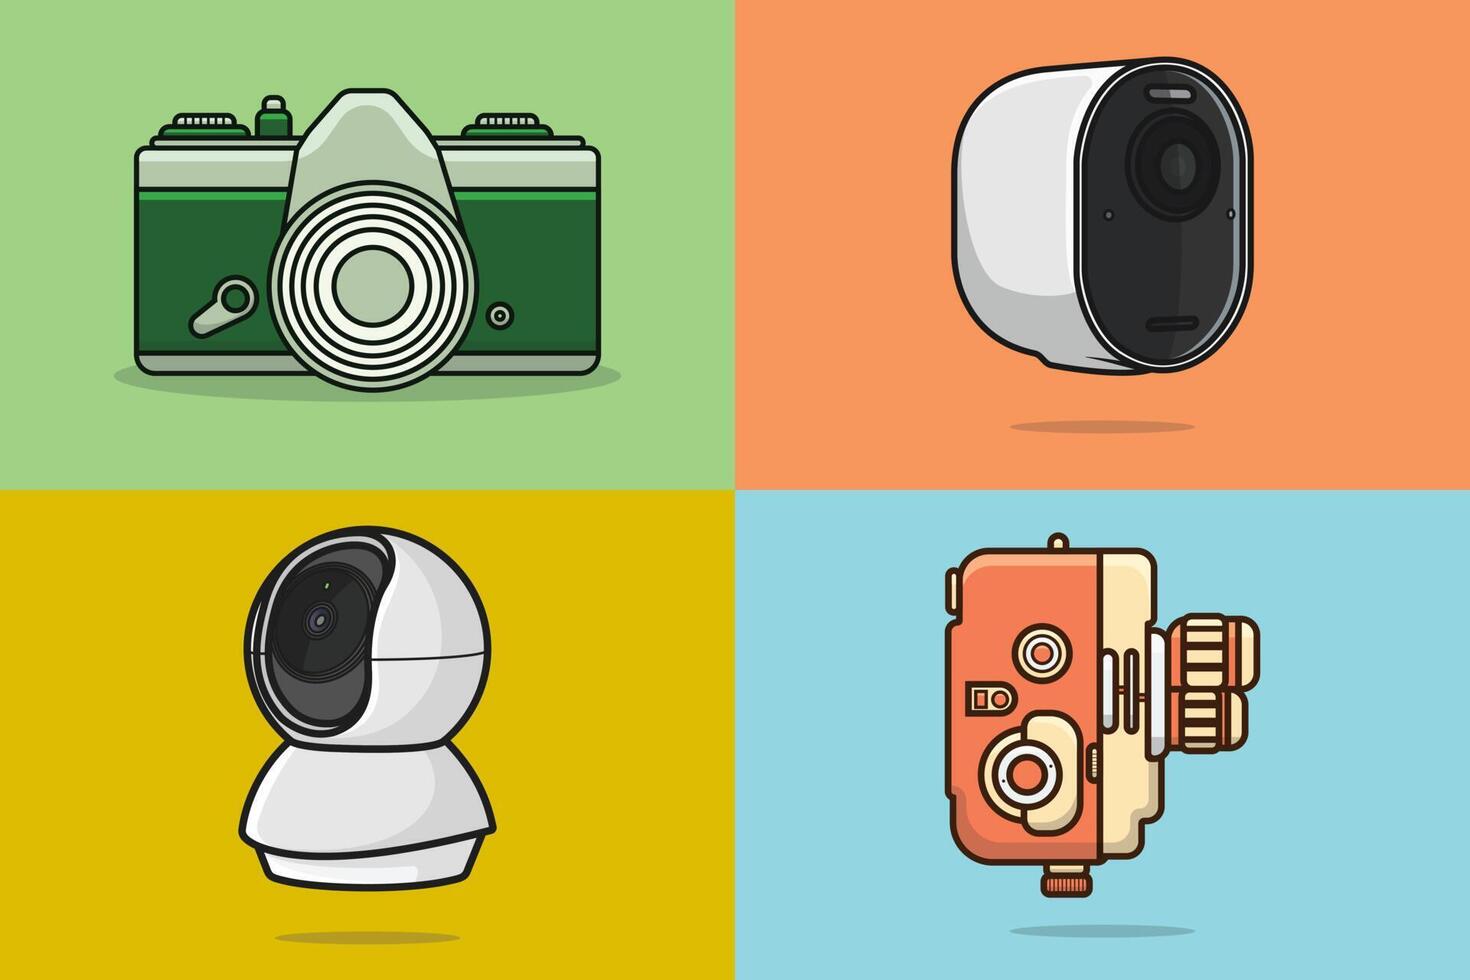 Collection of Digital Cameras vector illustration. Science and technology objects icon concept. Digital CCTV Cameras and Photography or Shooting Camera vector design. Home and City security system.